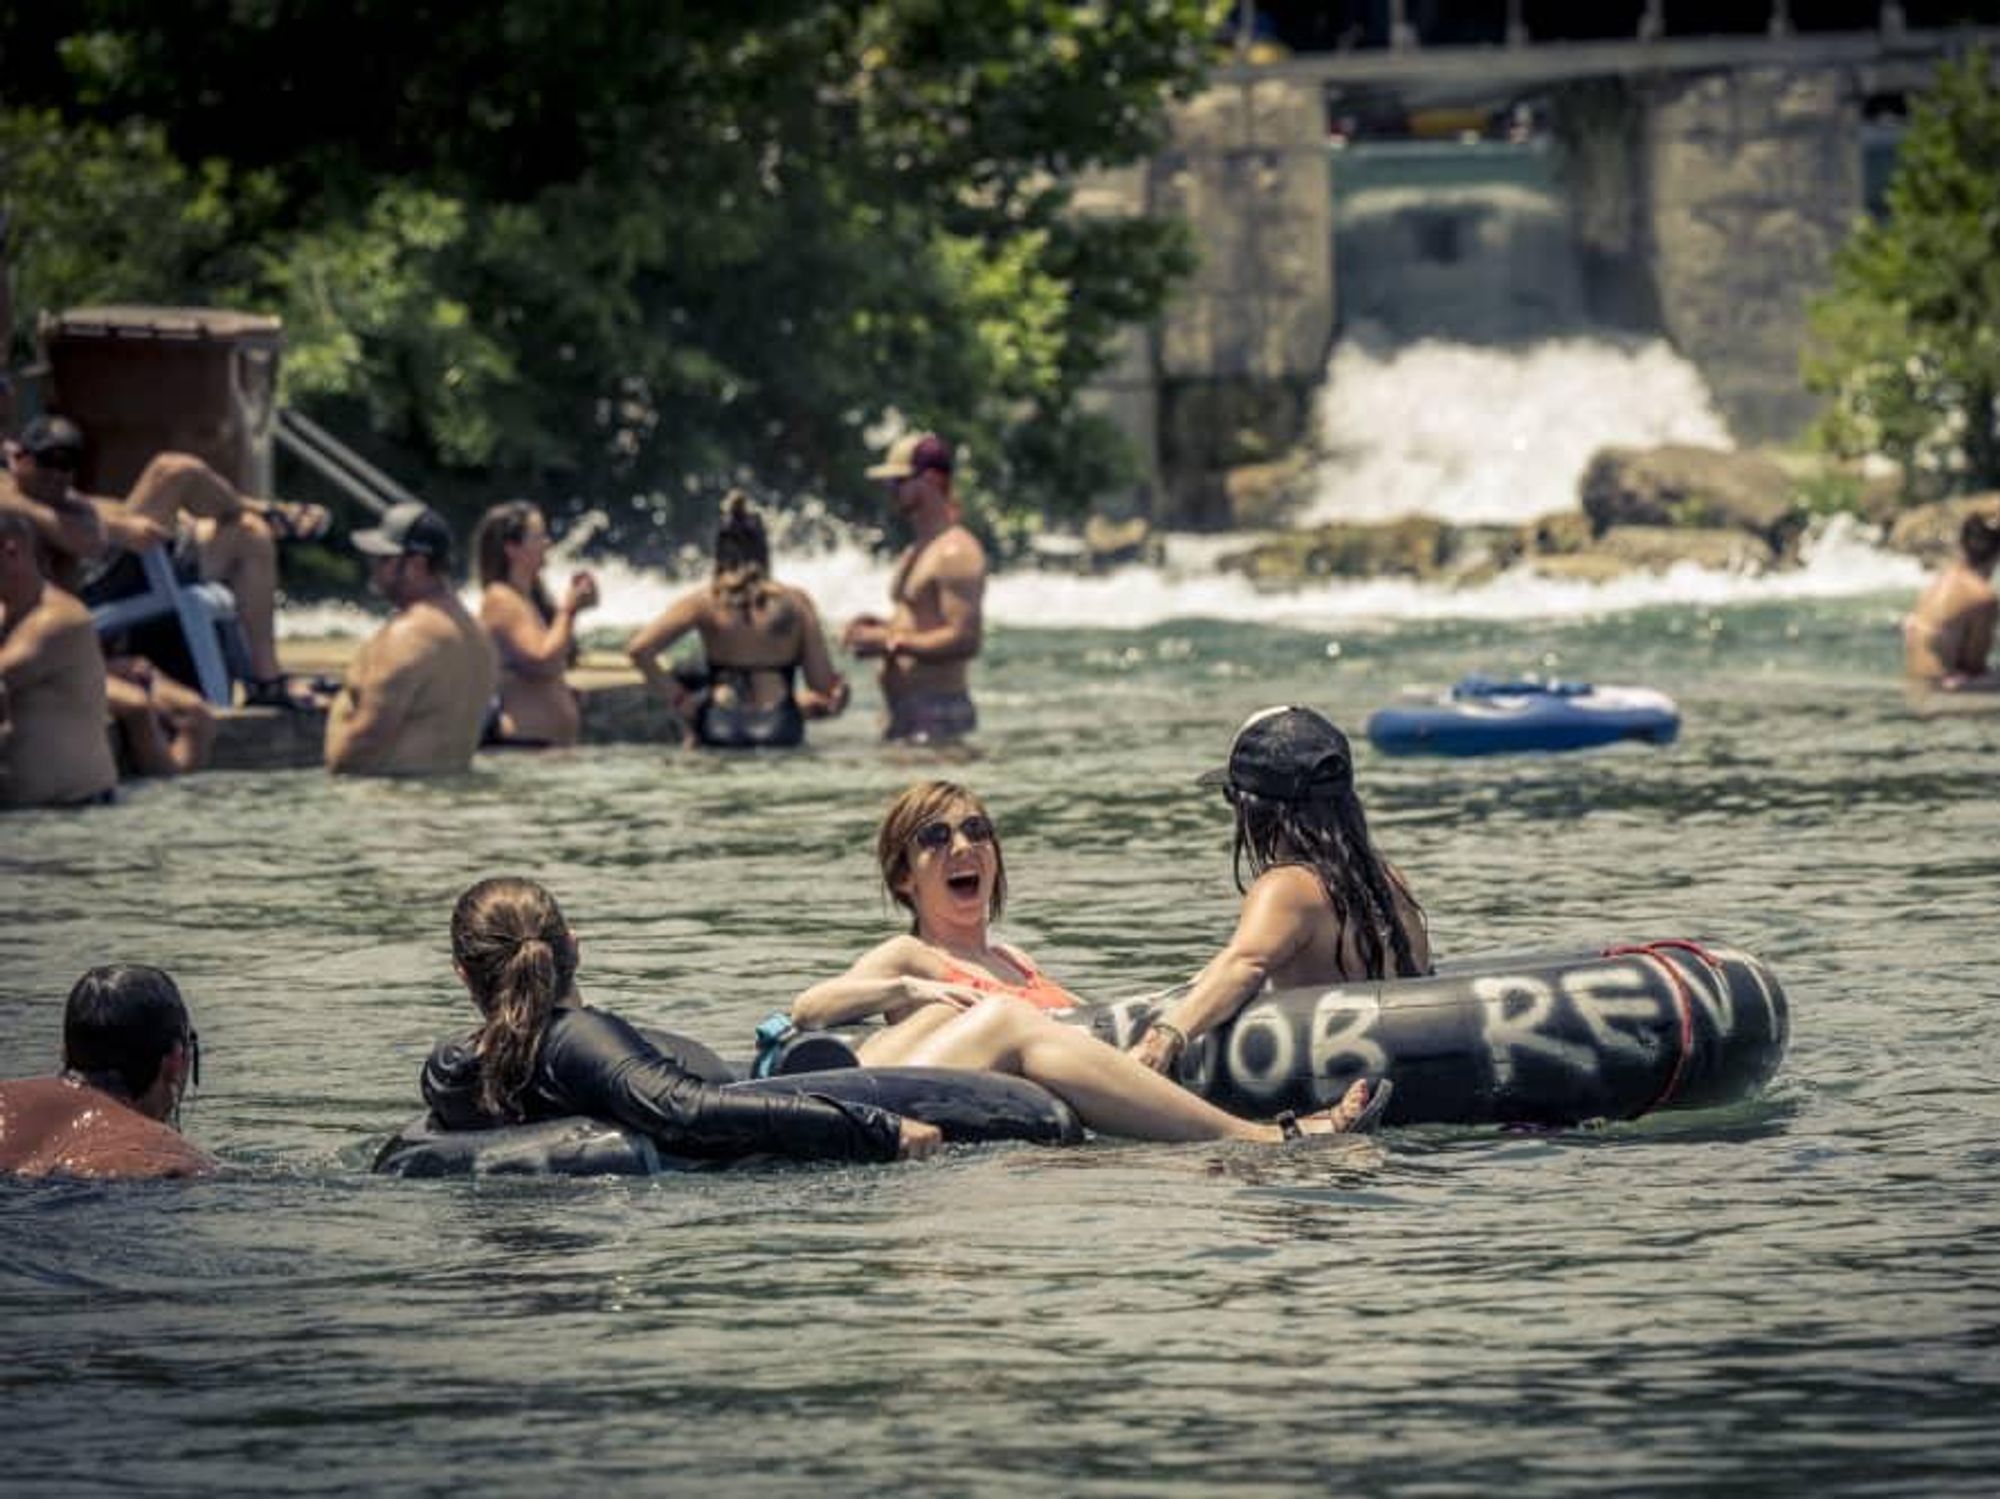 https://houston.culturemap.com/media-library/floating-the-river-new-braunfels.jpg?id=31479164&width=2000&height=1500&quality=85&coordinates=0%2C0%2C110%2C0